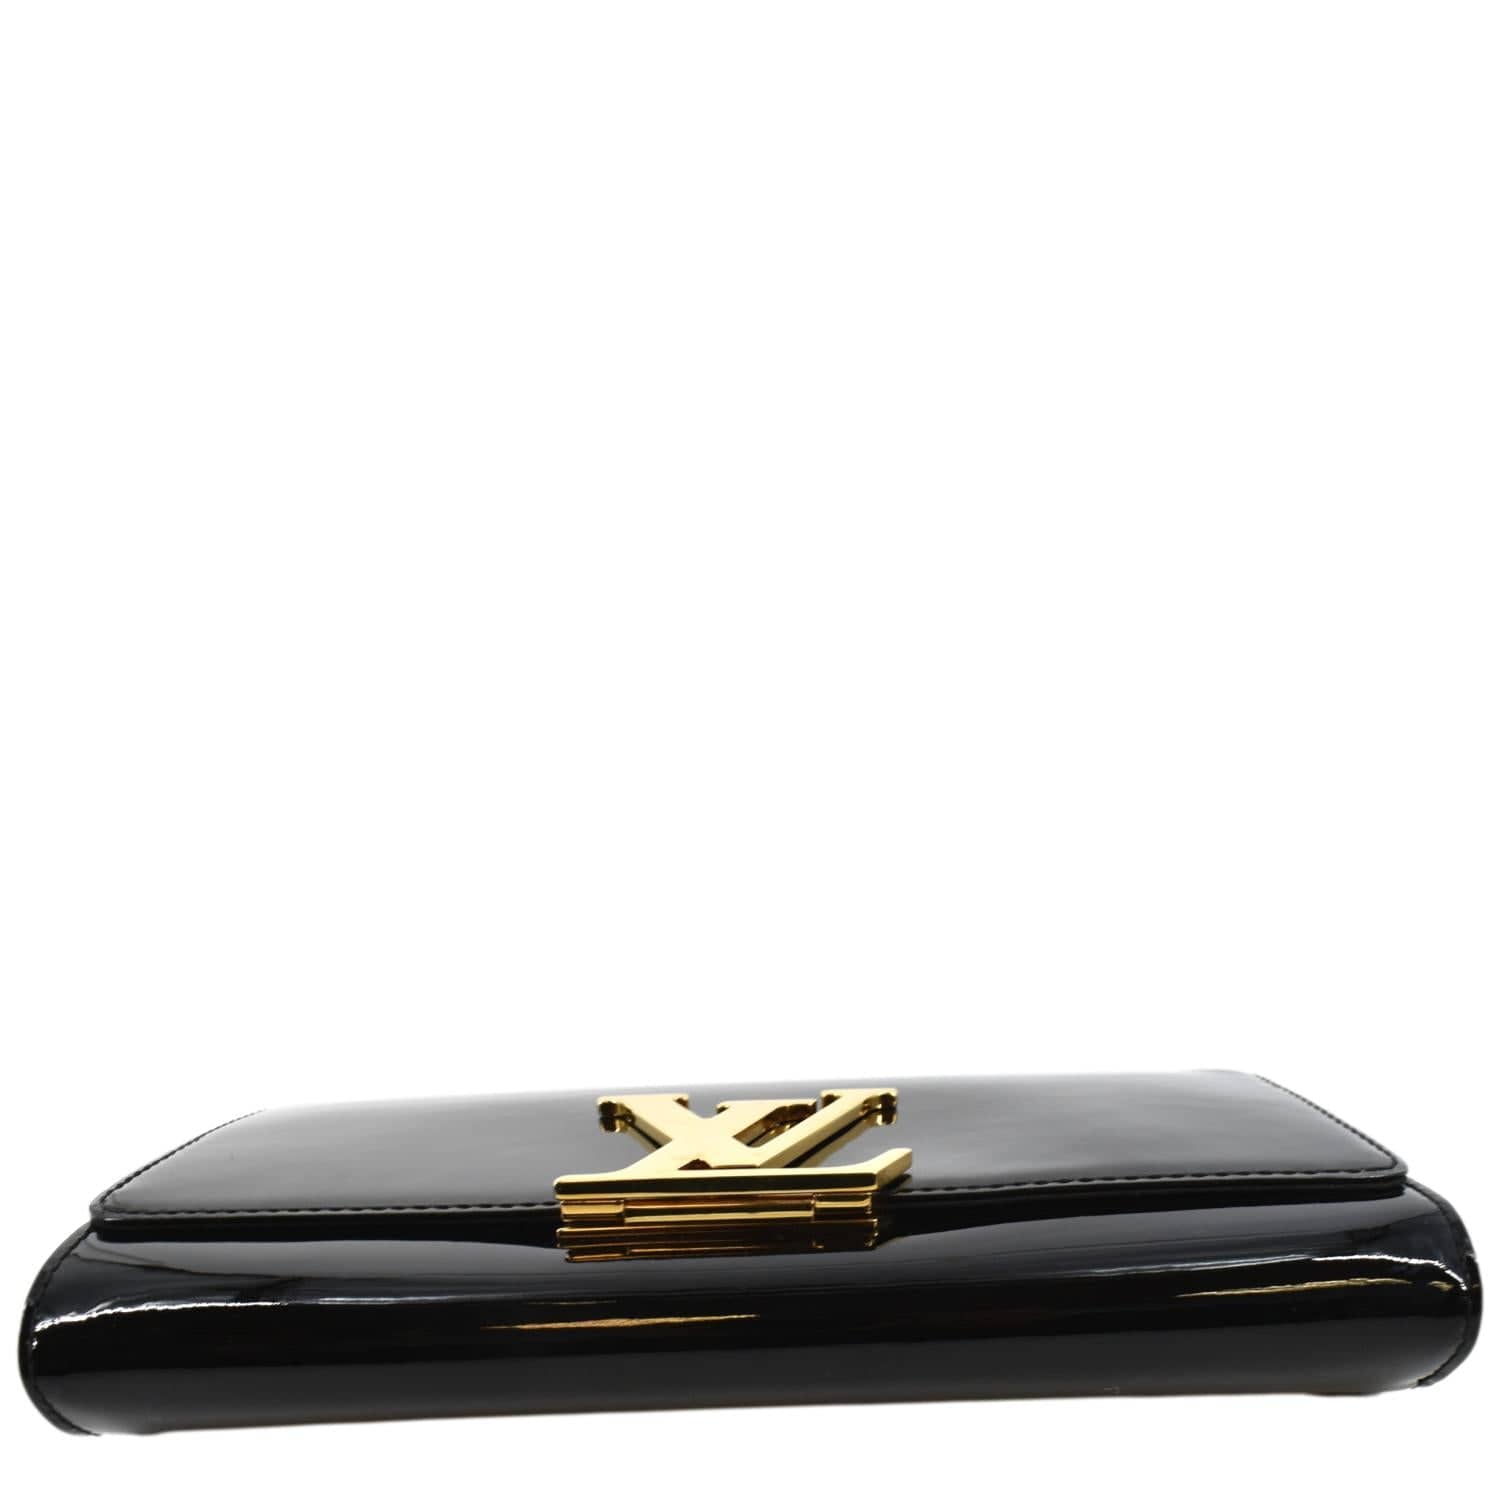 Louis Vuitton - Authenticated Wallet - Patent Leather Black for Women, Good Condition